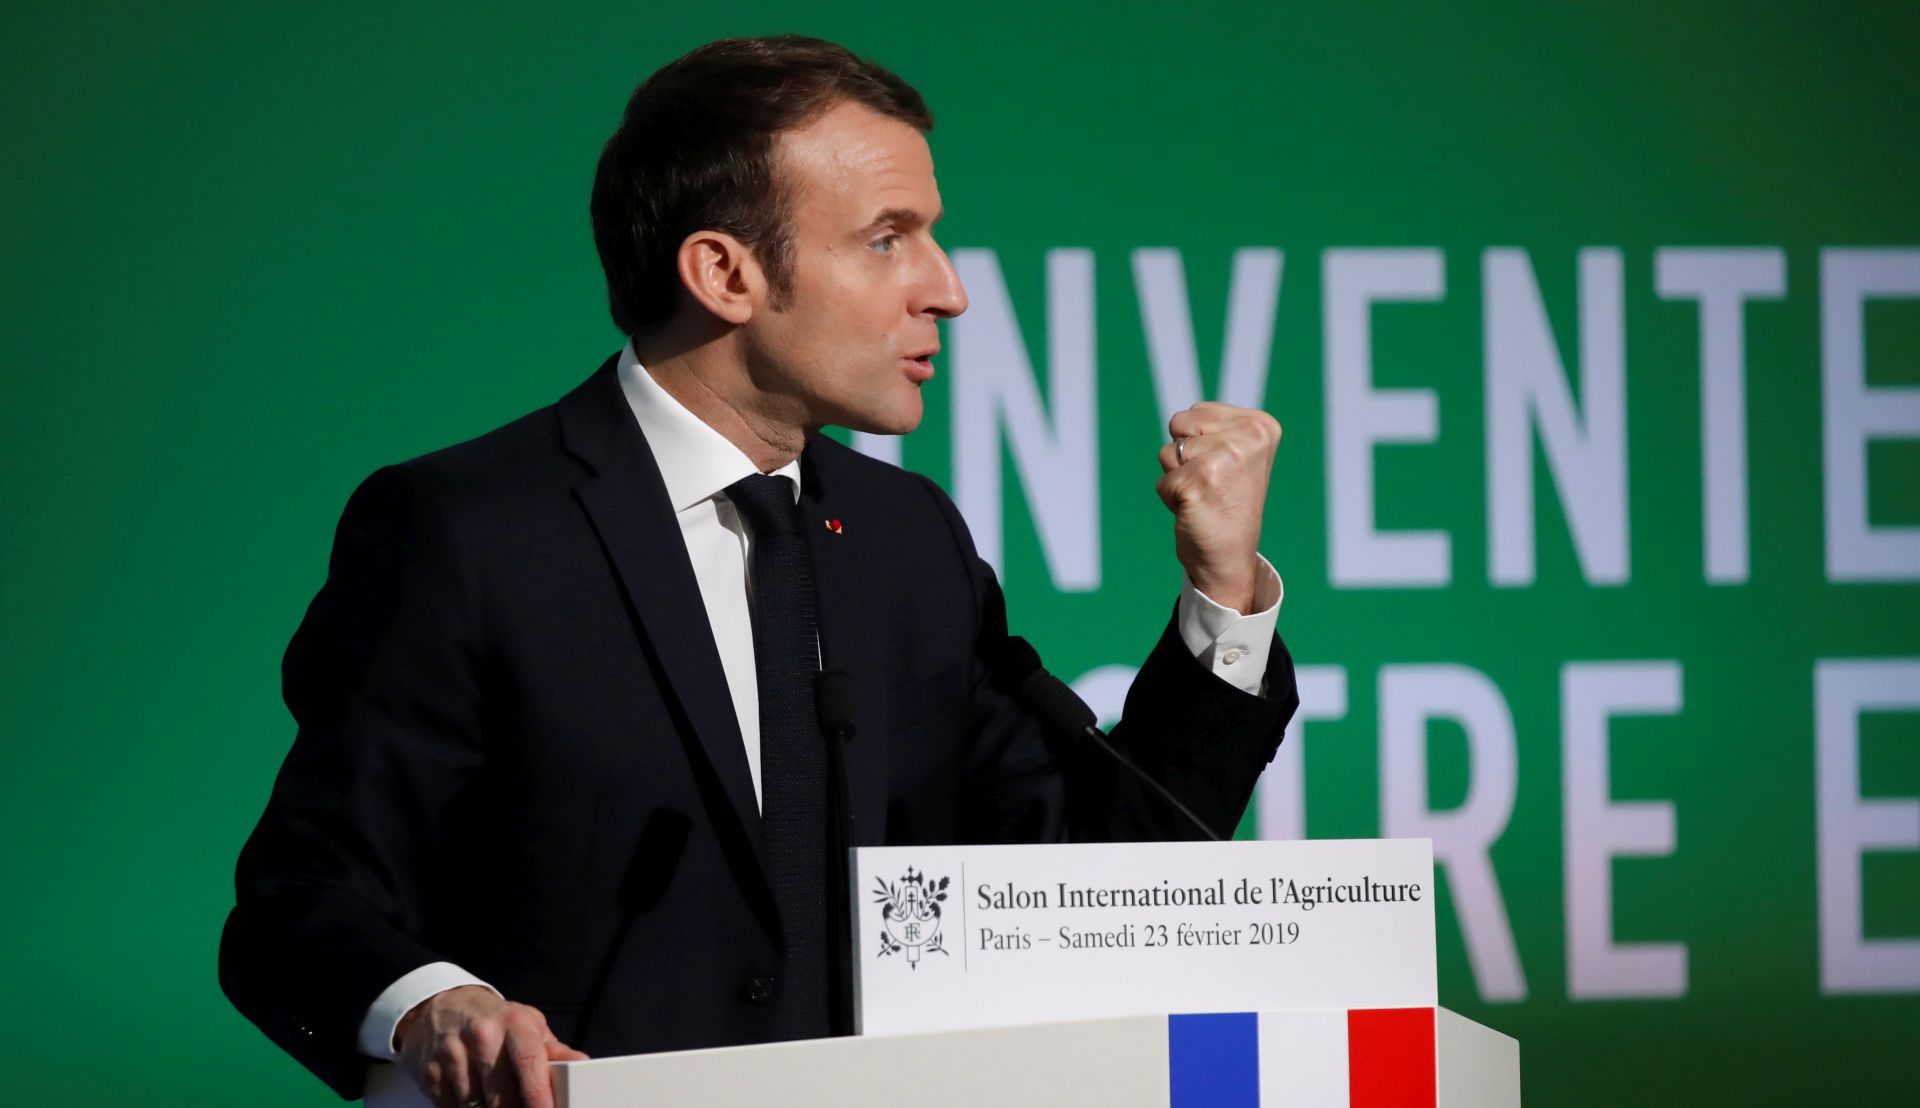 epa07389572 French President Emmanuel Macron delivers a speech at the opening of the International Agriculture Fair (Salon de l'Agriculture) in Paris, France, 23 February 2019.  EPA/CHARLES PLATIAU / POOL  MAXPPP OUT